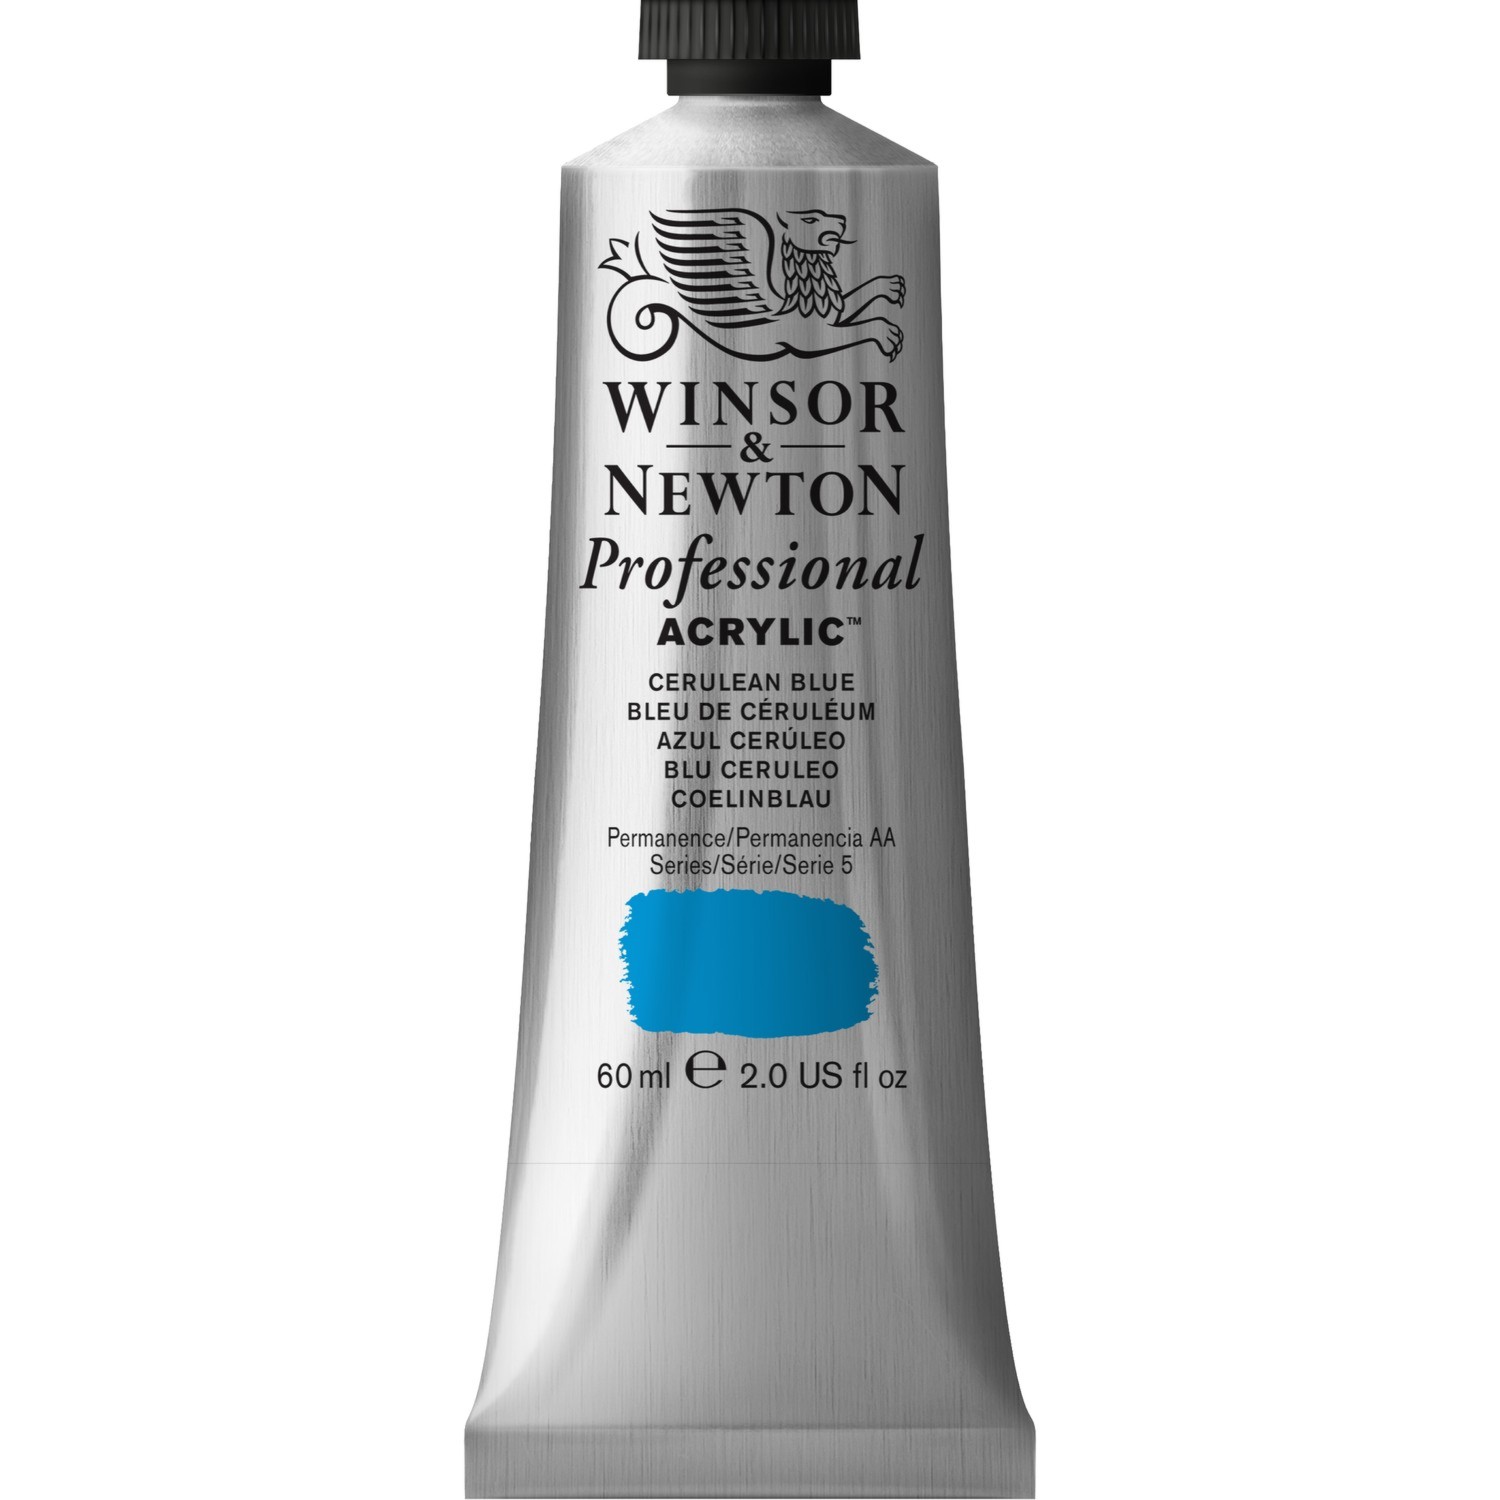 Winsor and Newton 60ml Professional Acrylic Paint - Cerulean Blue Image 1